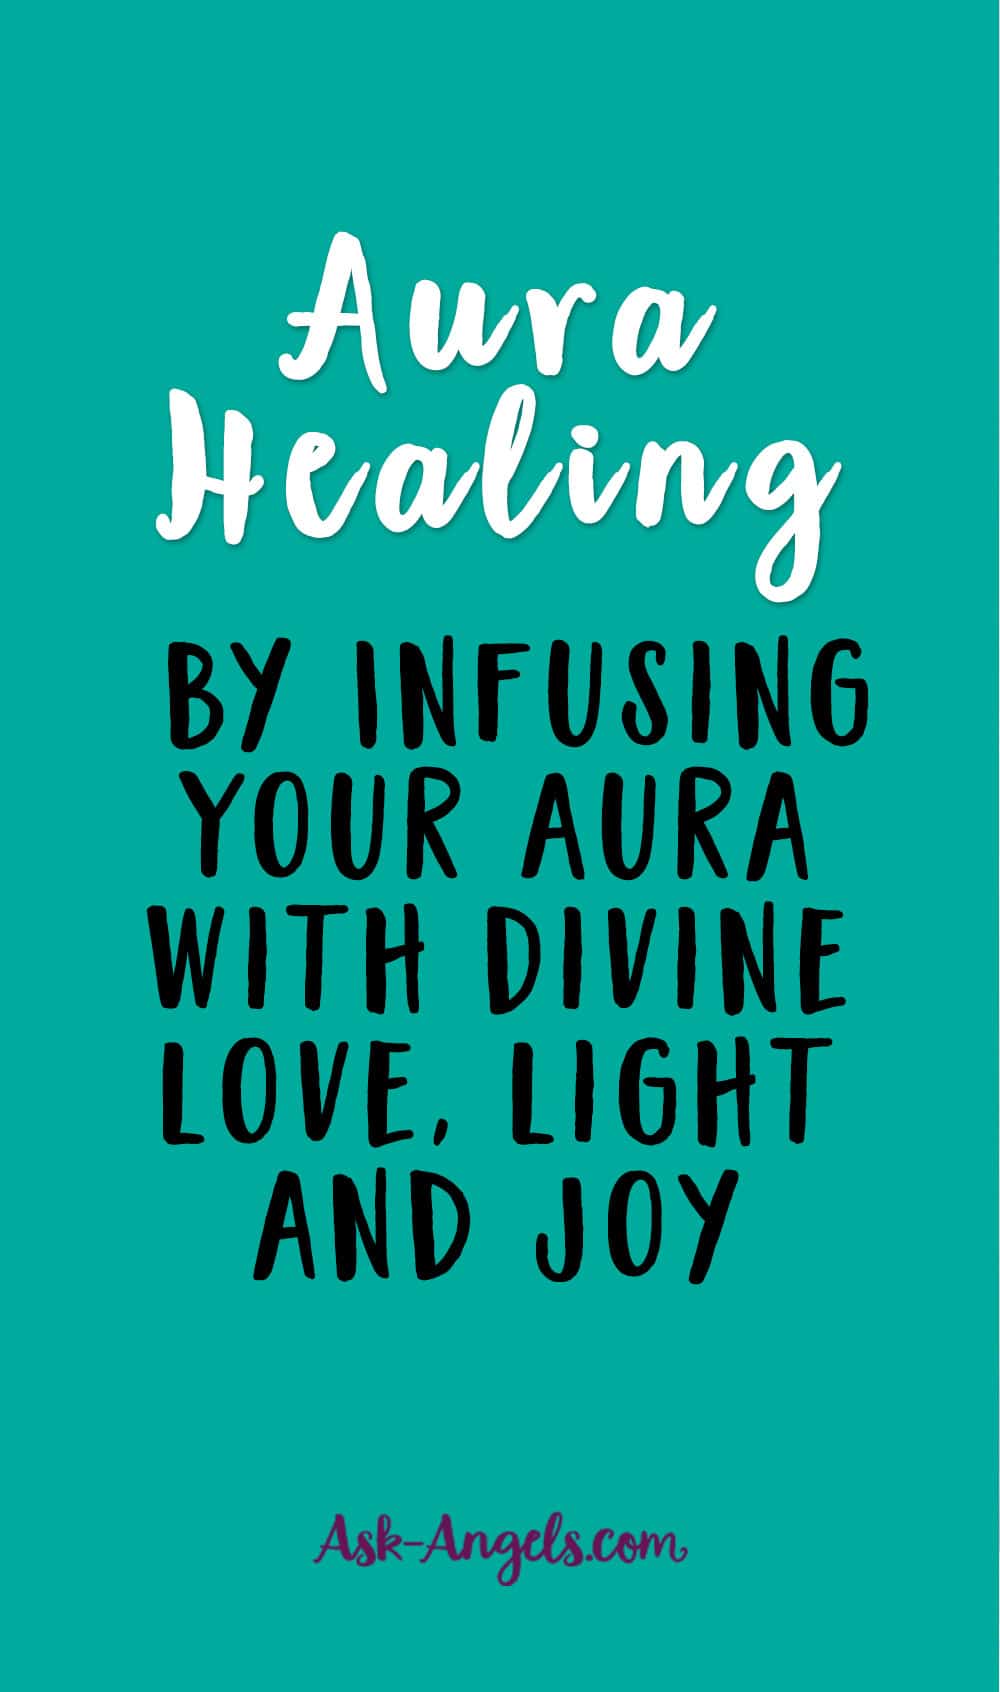 Aura Healing - Infusing Your Aura With Love, Light and Joy